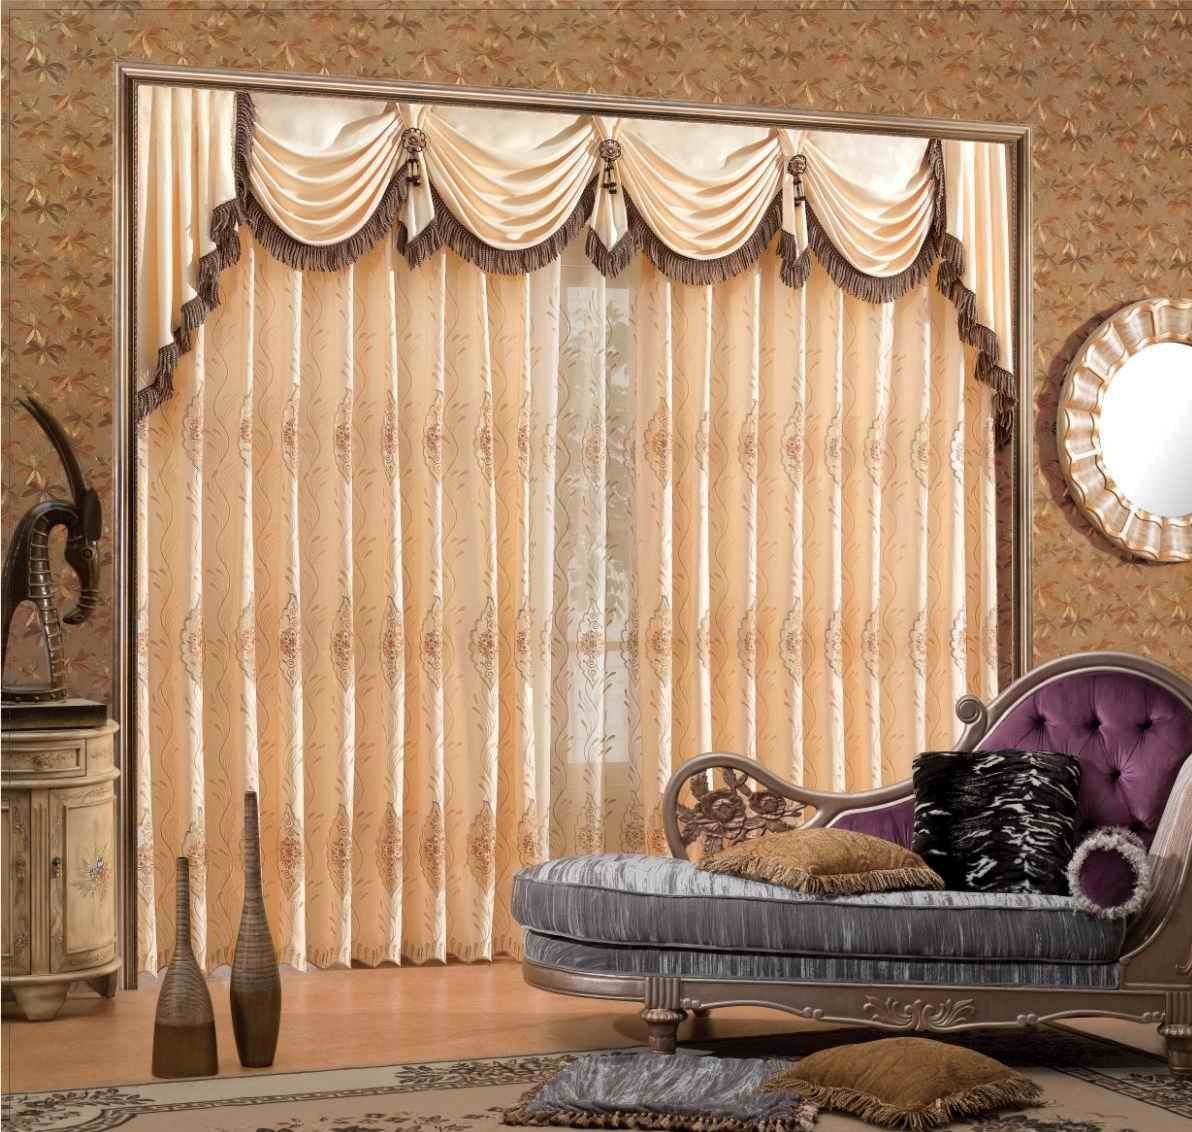 0 Buy 1 Product On Alibaba European Style Pertaining To Moroccan Style Drapes (View 13 of 15)